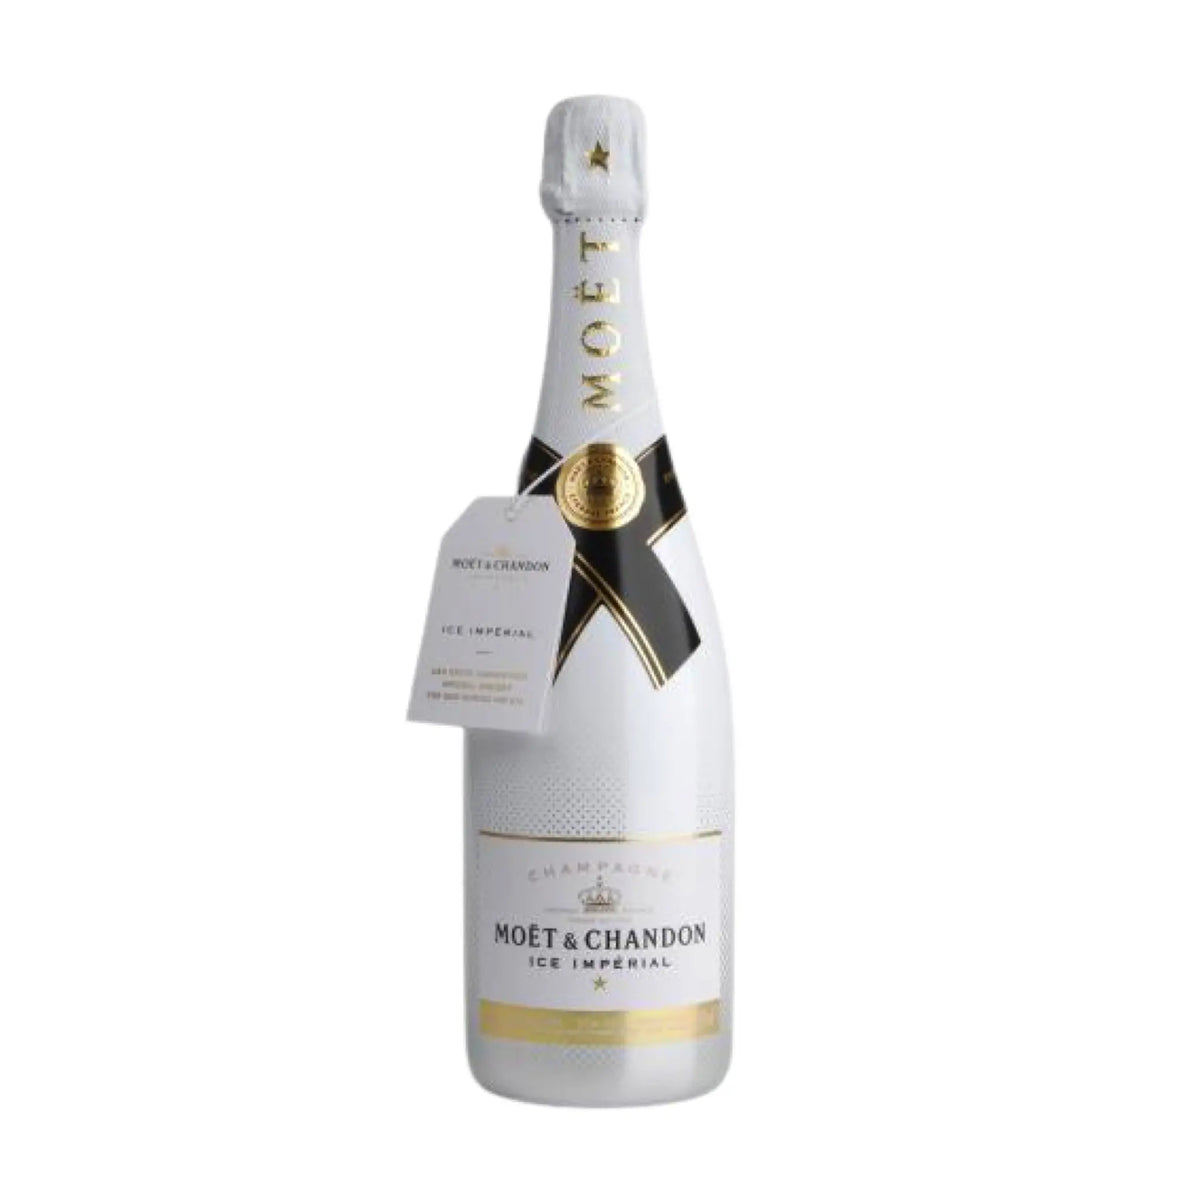 Moet et Chandon-Champagner-Pinot Noir, Pinot Meunier, Chardonnay-ICE Imperial Champagne AOC-WINECOM